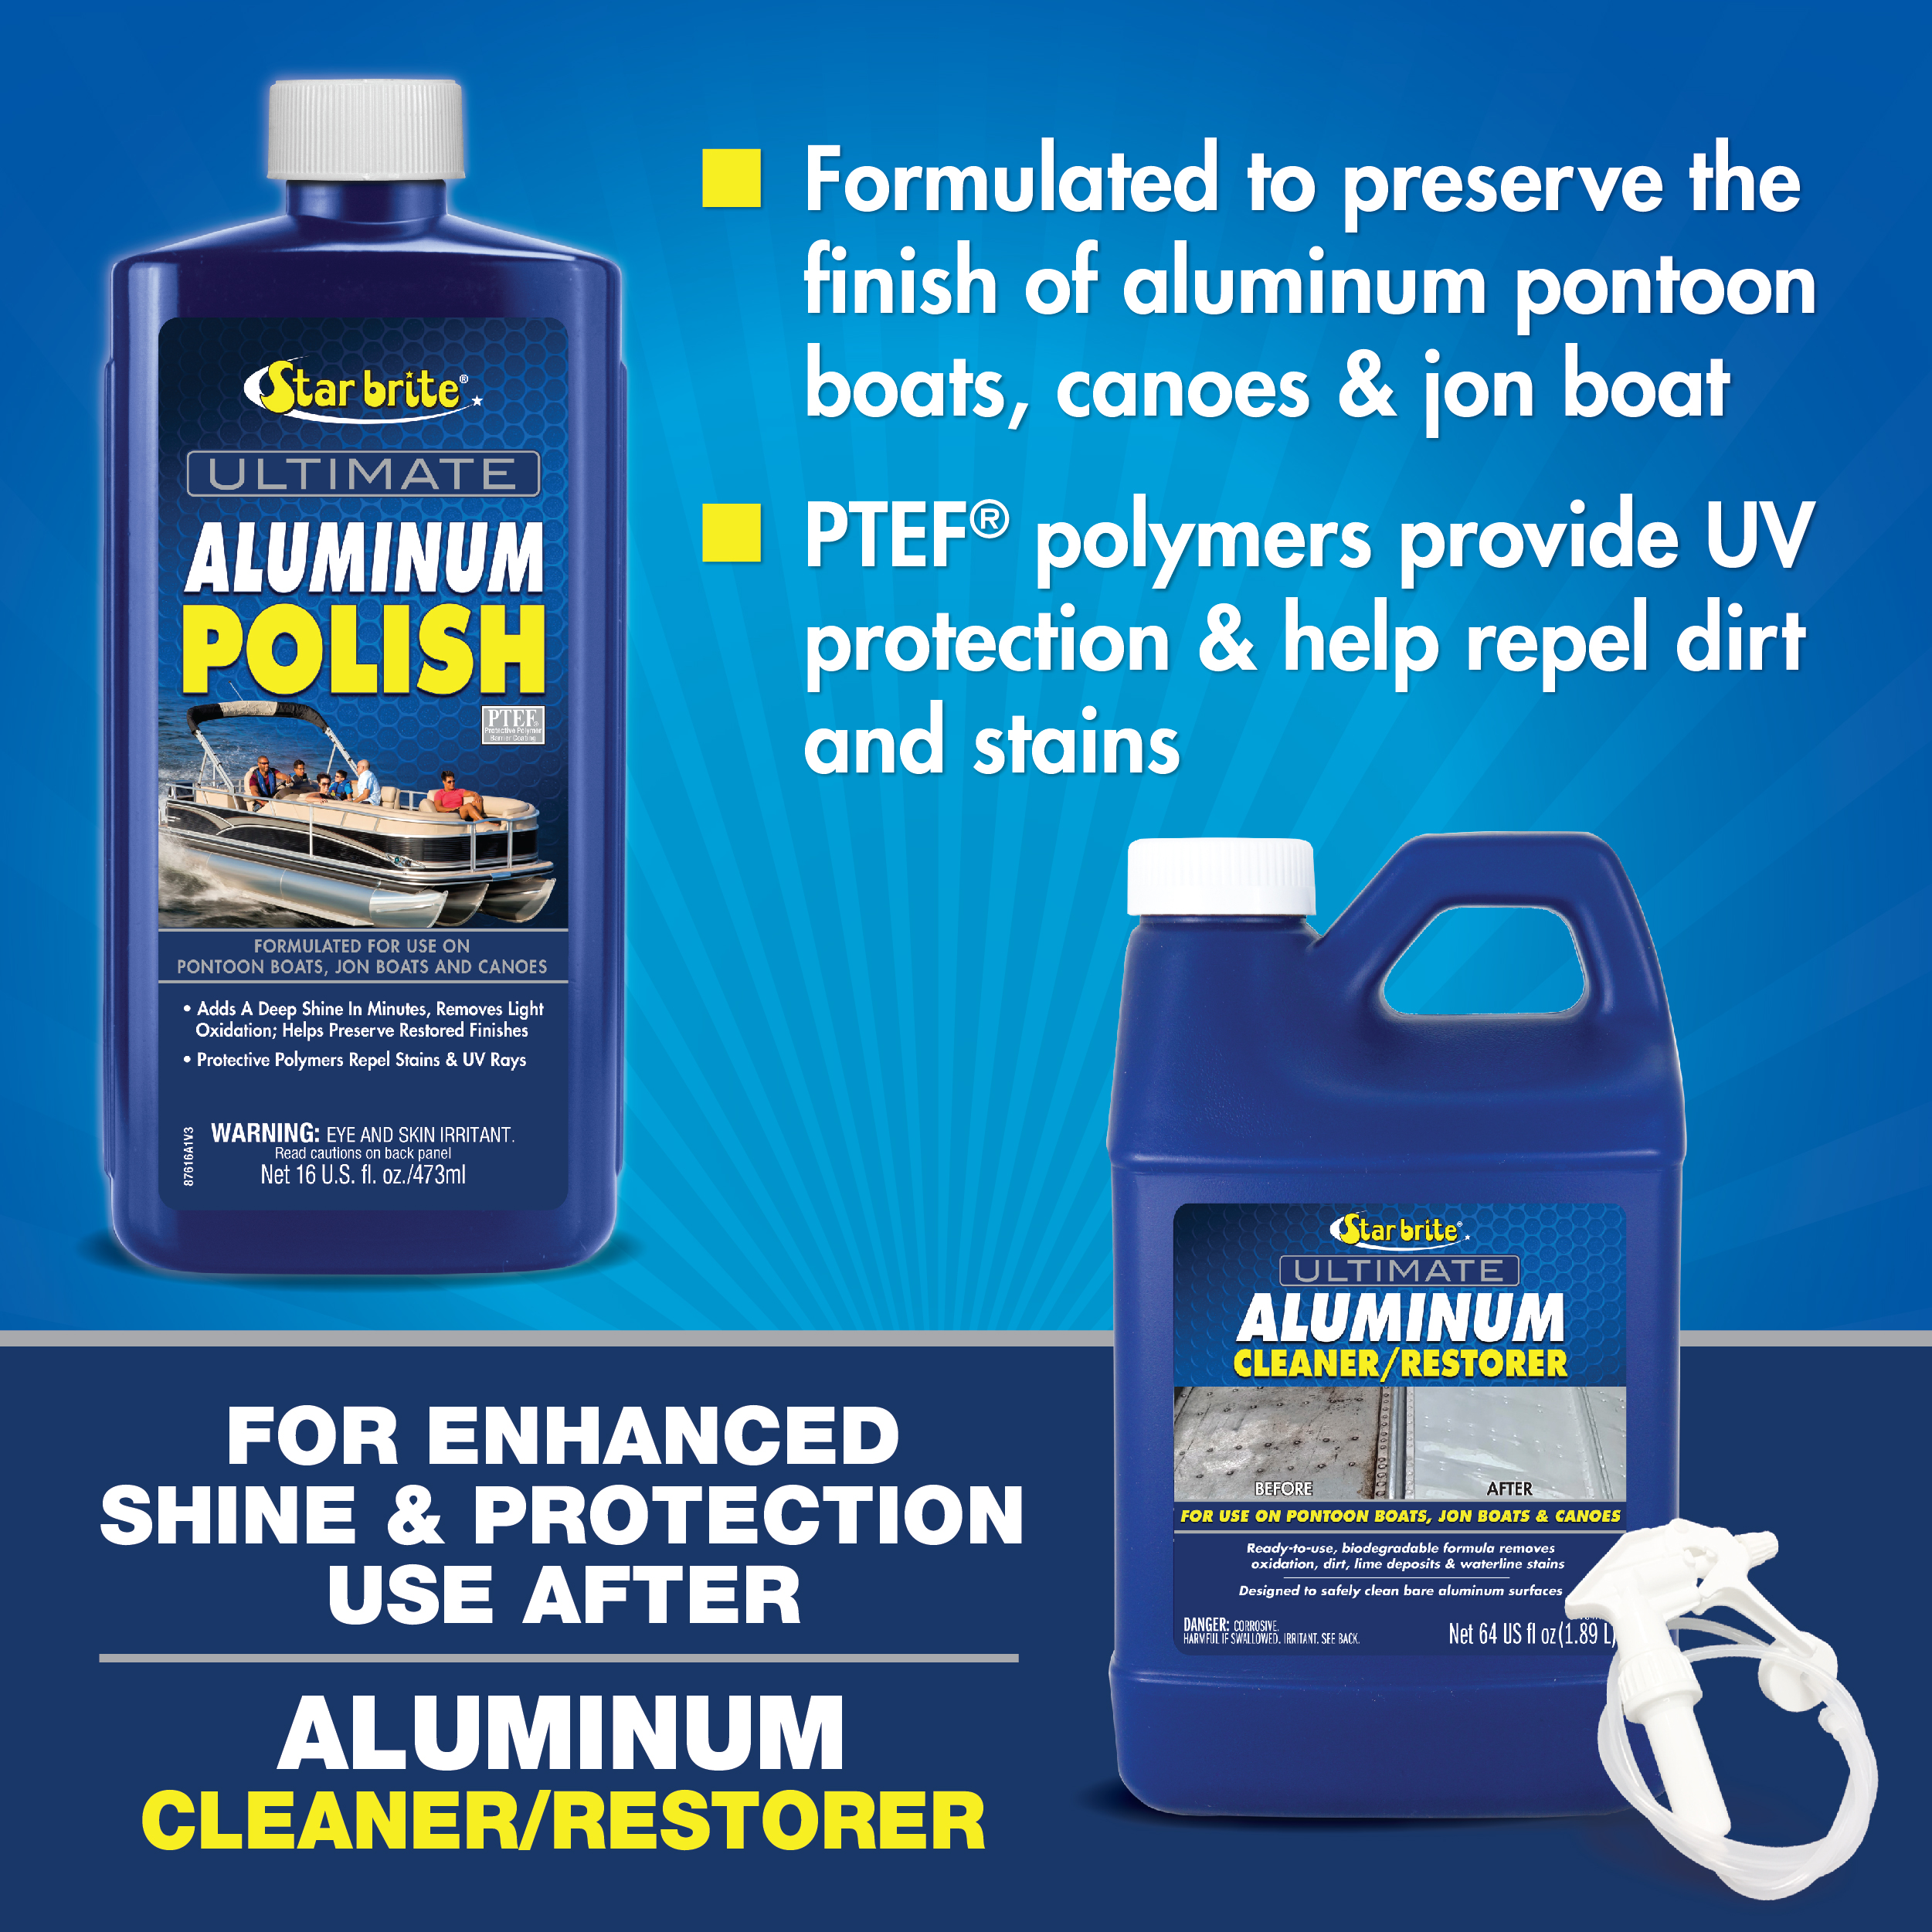 How To Clean & Restore Oxidized Aluminum W/ Star brite  Ultimate Aluminum  Cleaner & Restorer is the best choice for quickly cleaning and improving  the appearance of all aluminum pontoon boats